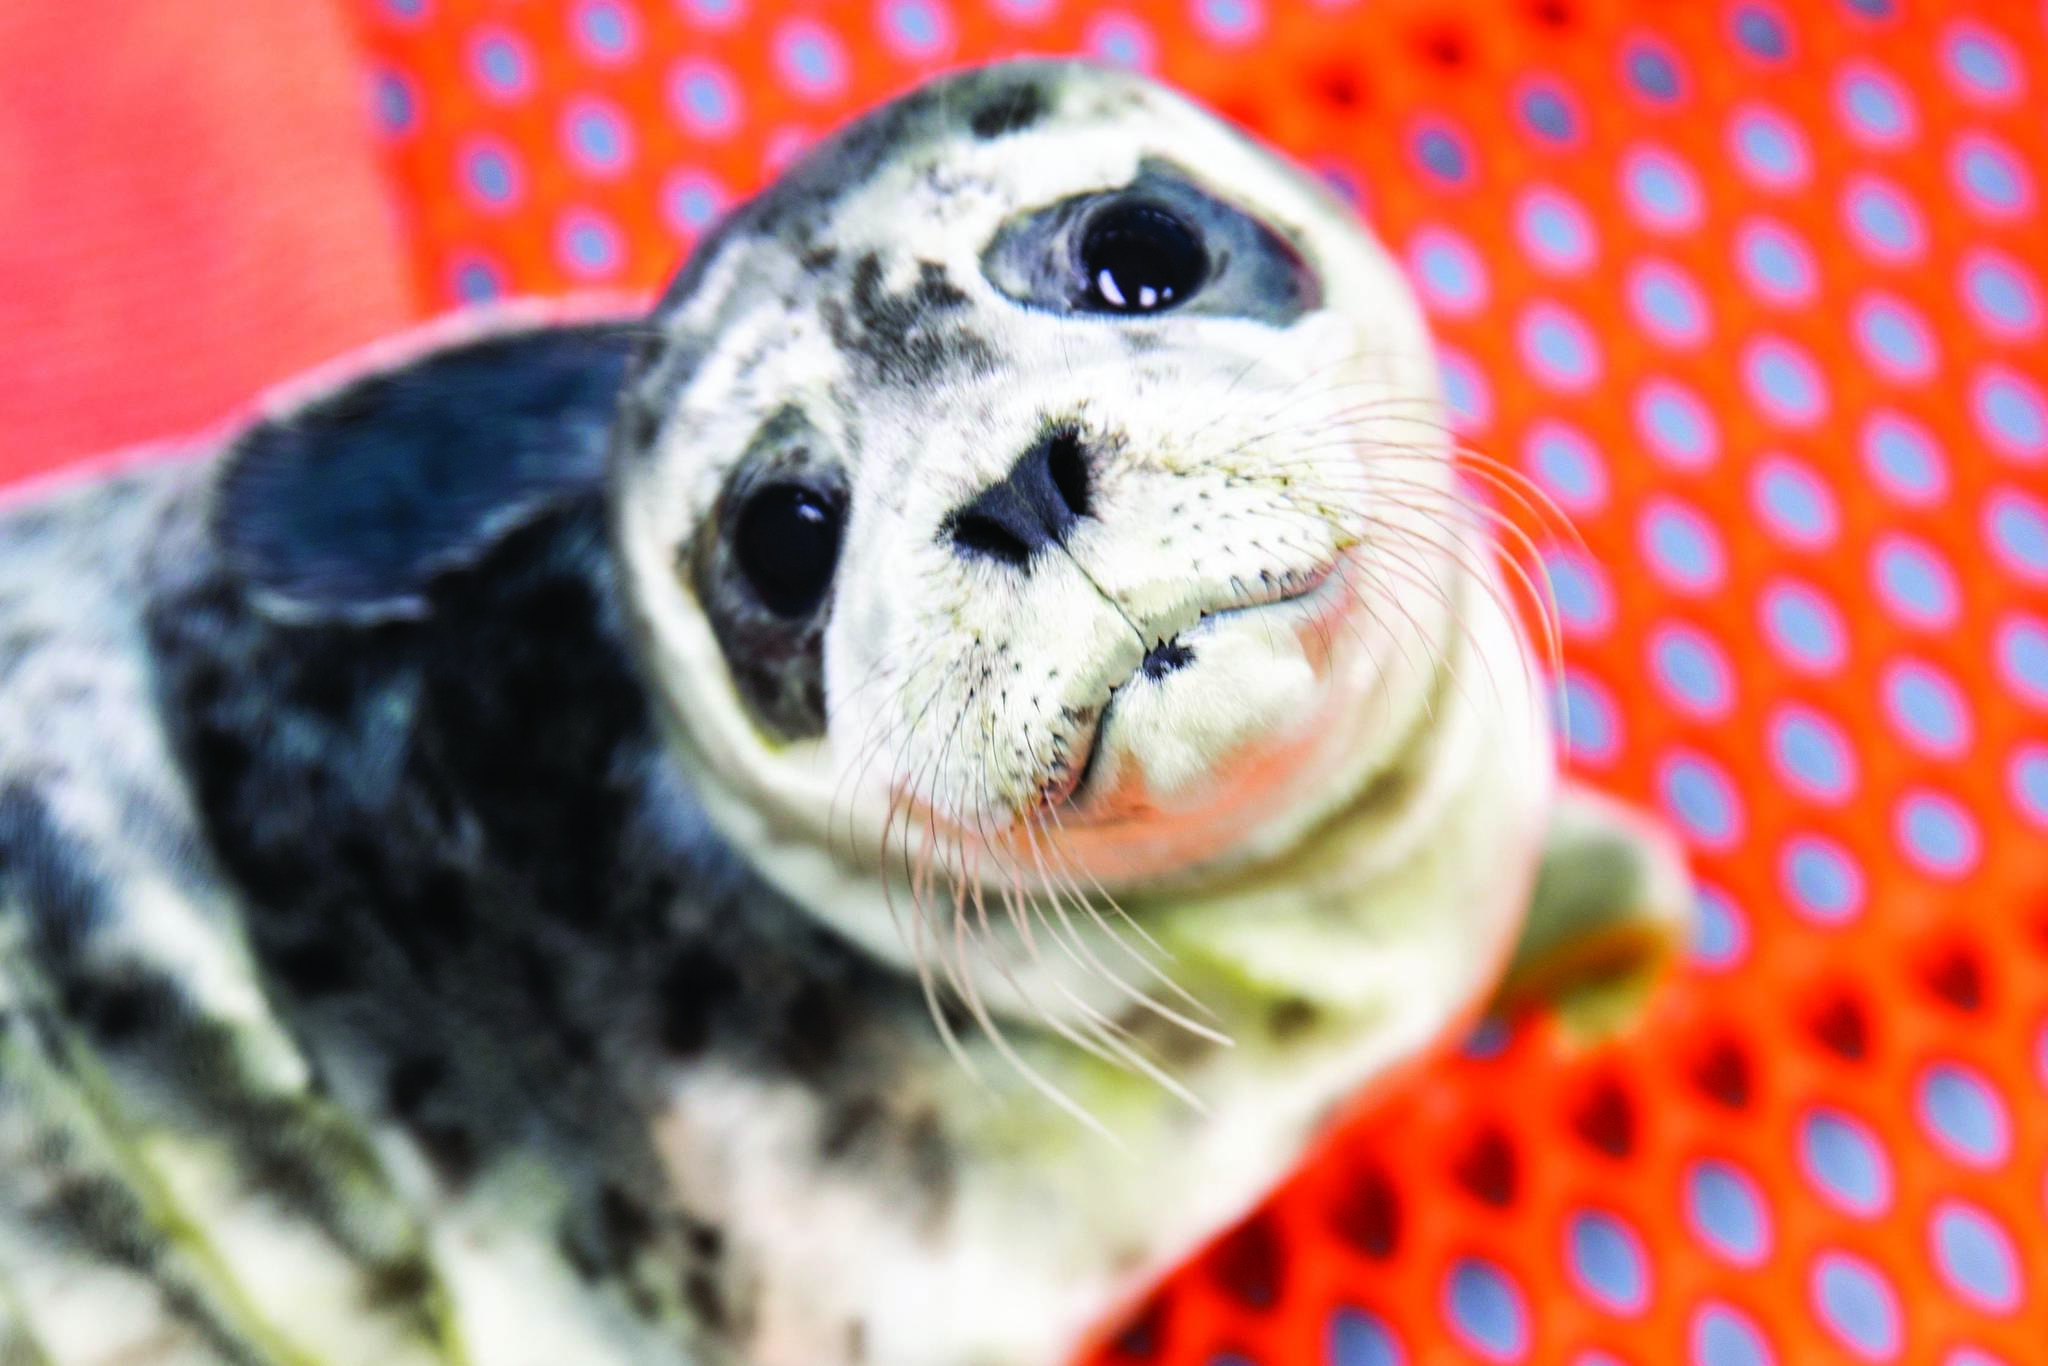 A rescued harbor seal pups is seen at the Alaska SeaLife Center in Seward in this undated photo. (Courtesy Chloe Rossman/Alaska SeaLife Center)